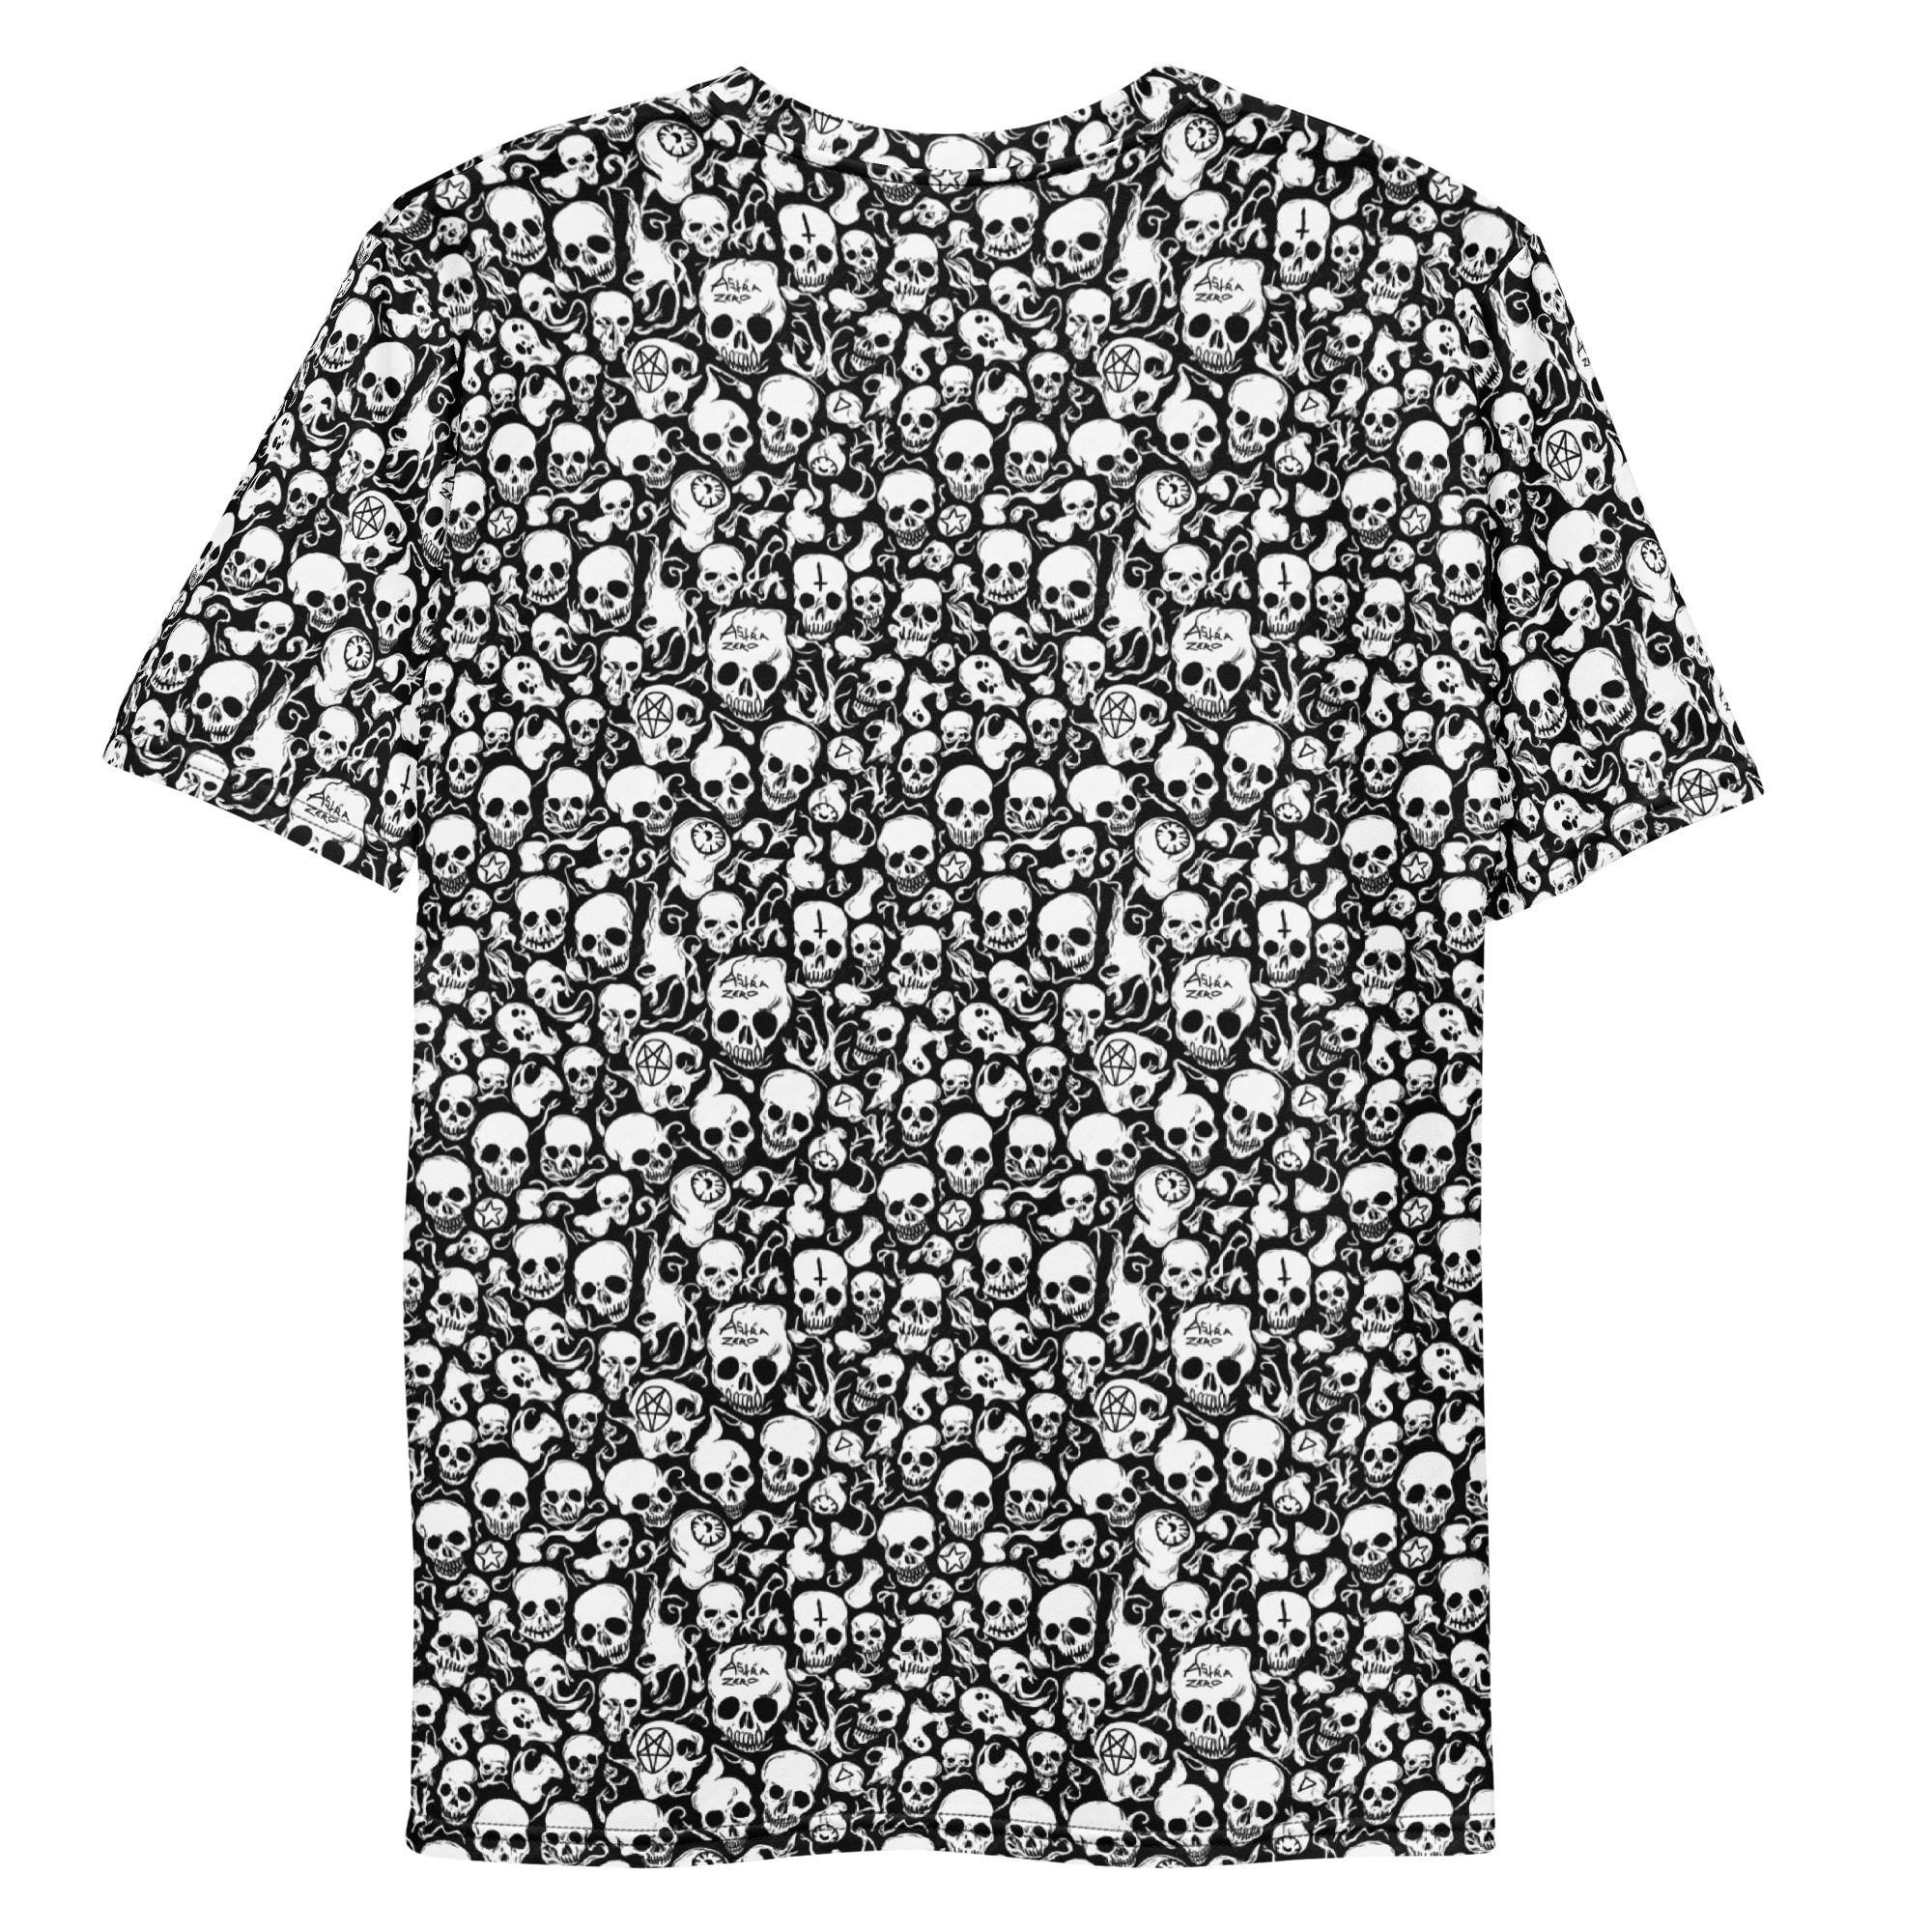 Featured image for “Abstract Skulls - Men's all over t-shirt”